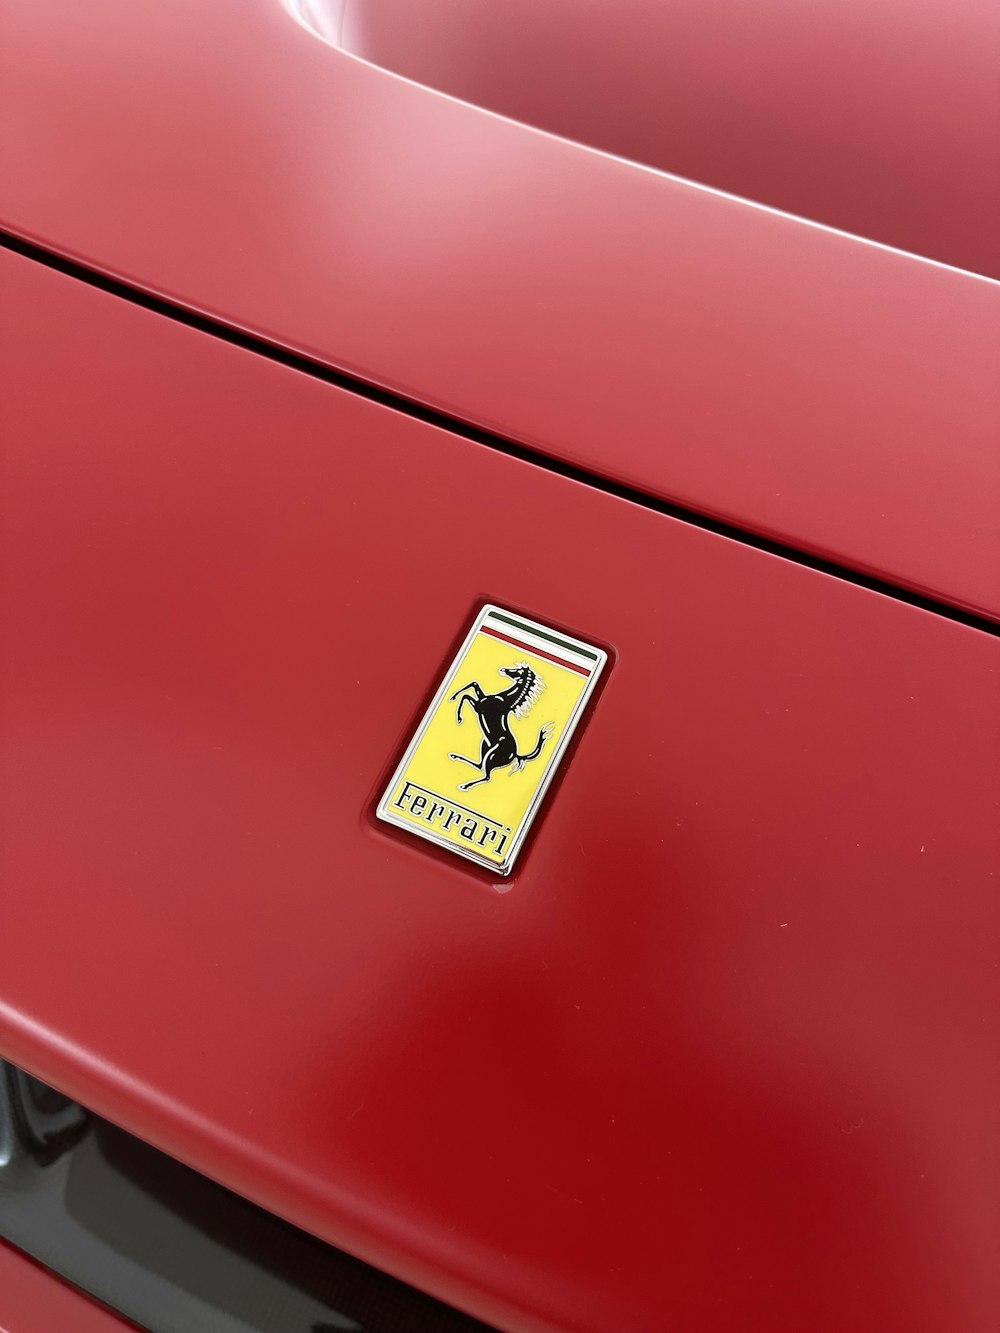 a close up of a red car with a yellow emblem